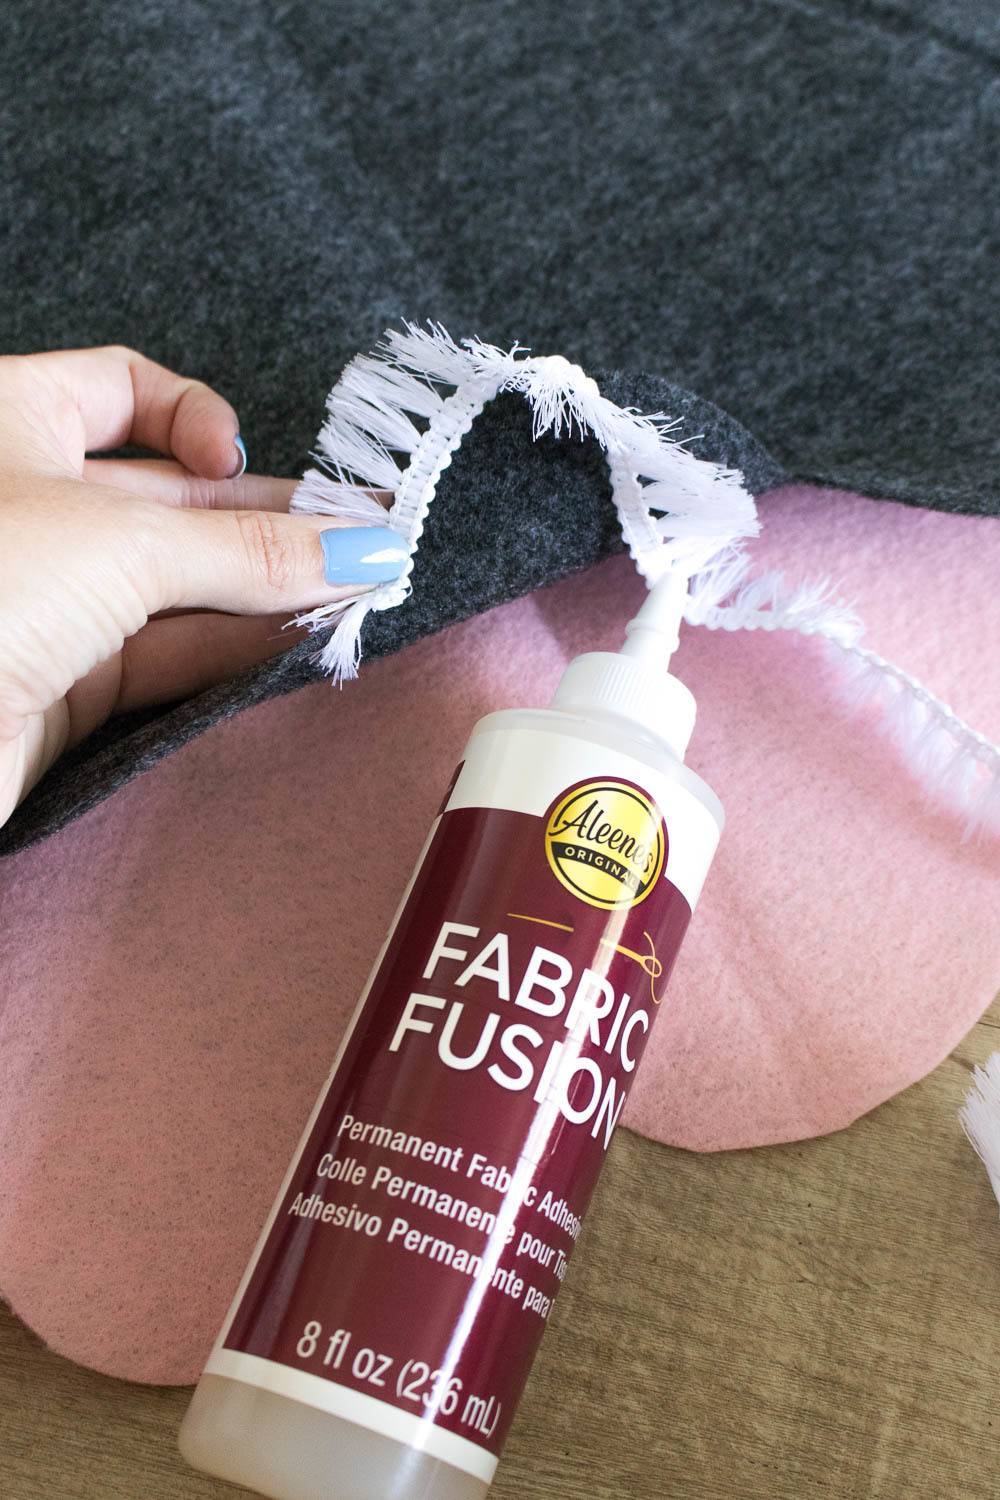 A person is gluing White Fringe on to Pink fabric using fabric glue.